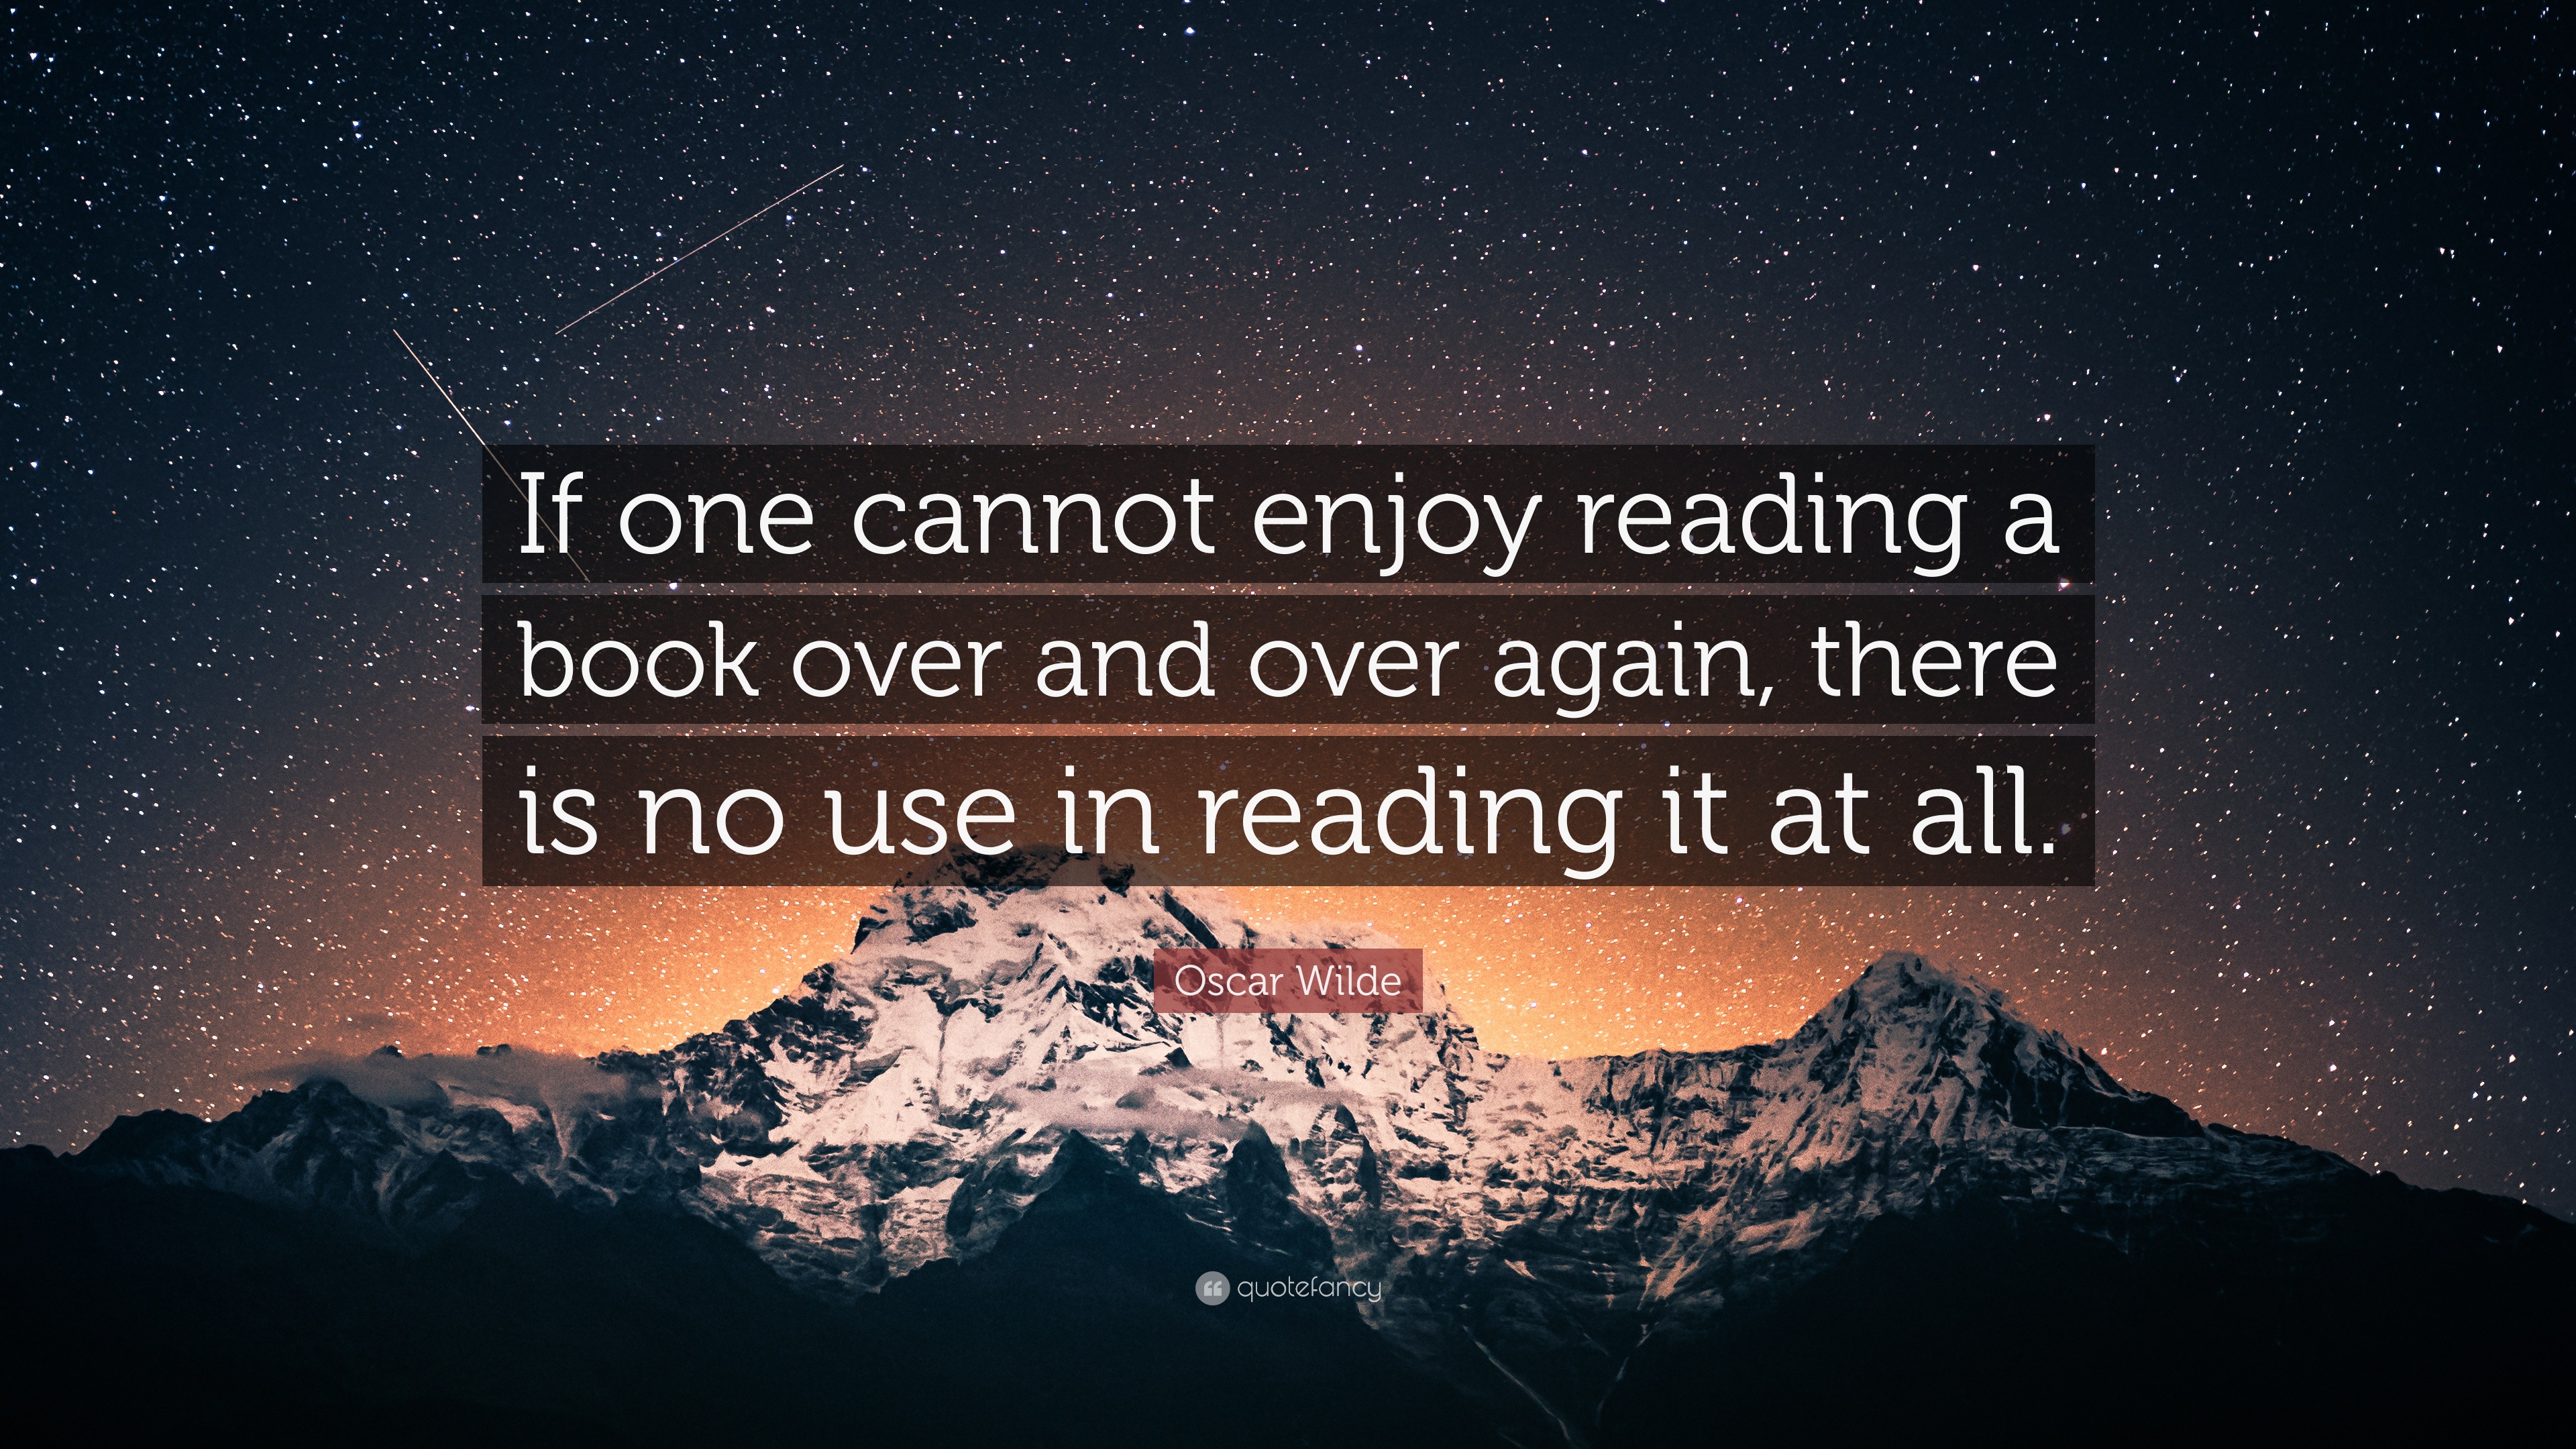 Oscar Wilde Quote: “If one cannot enjoy reading a book over and over again,  there is